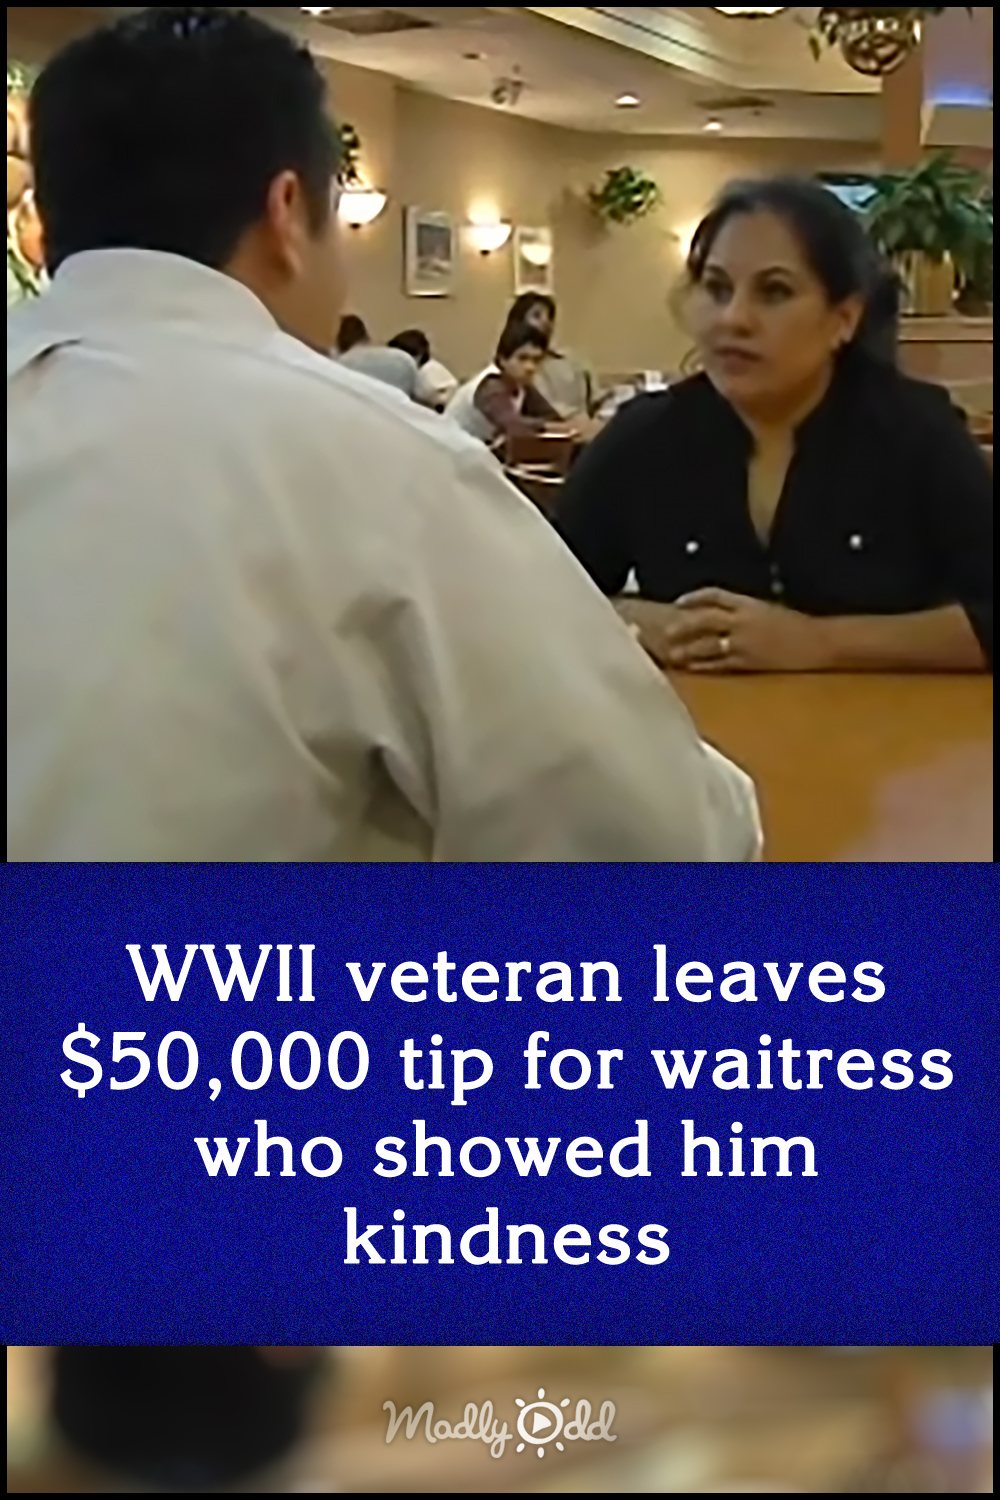 WWII veteran leaves $50,000 tip for waitress who showed him kindness